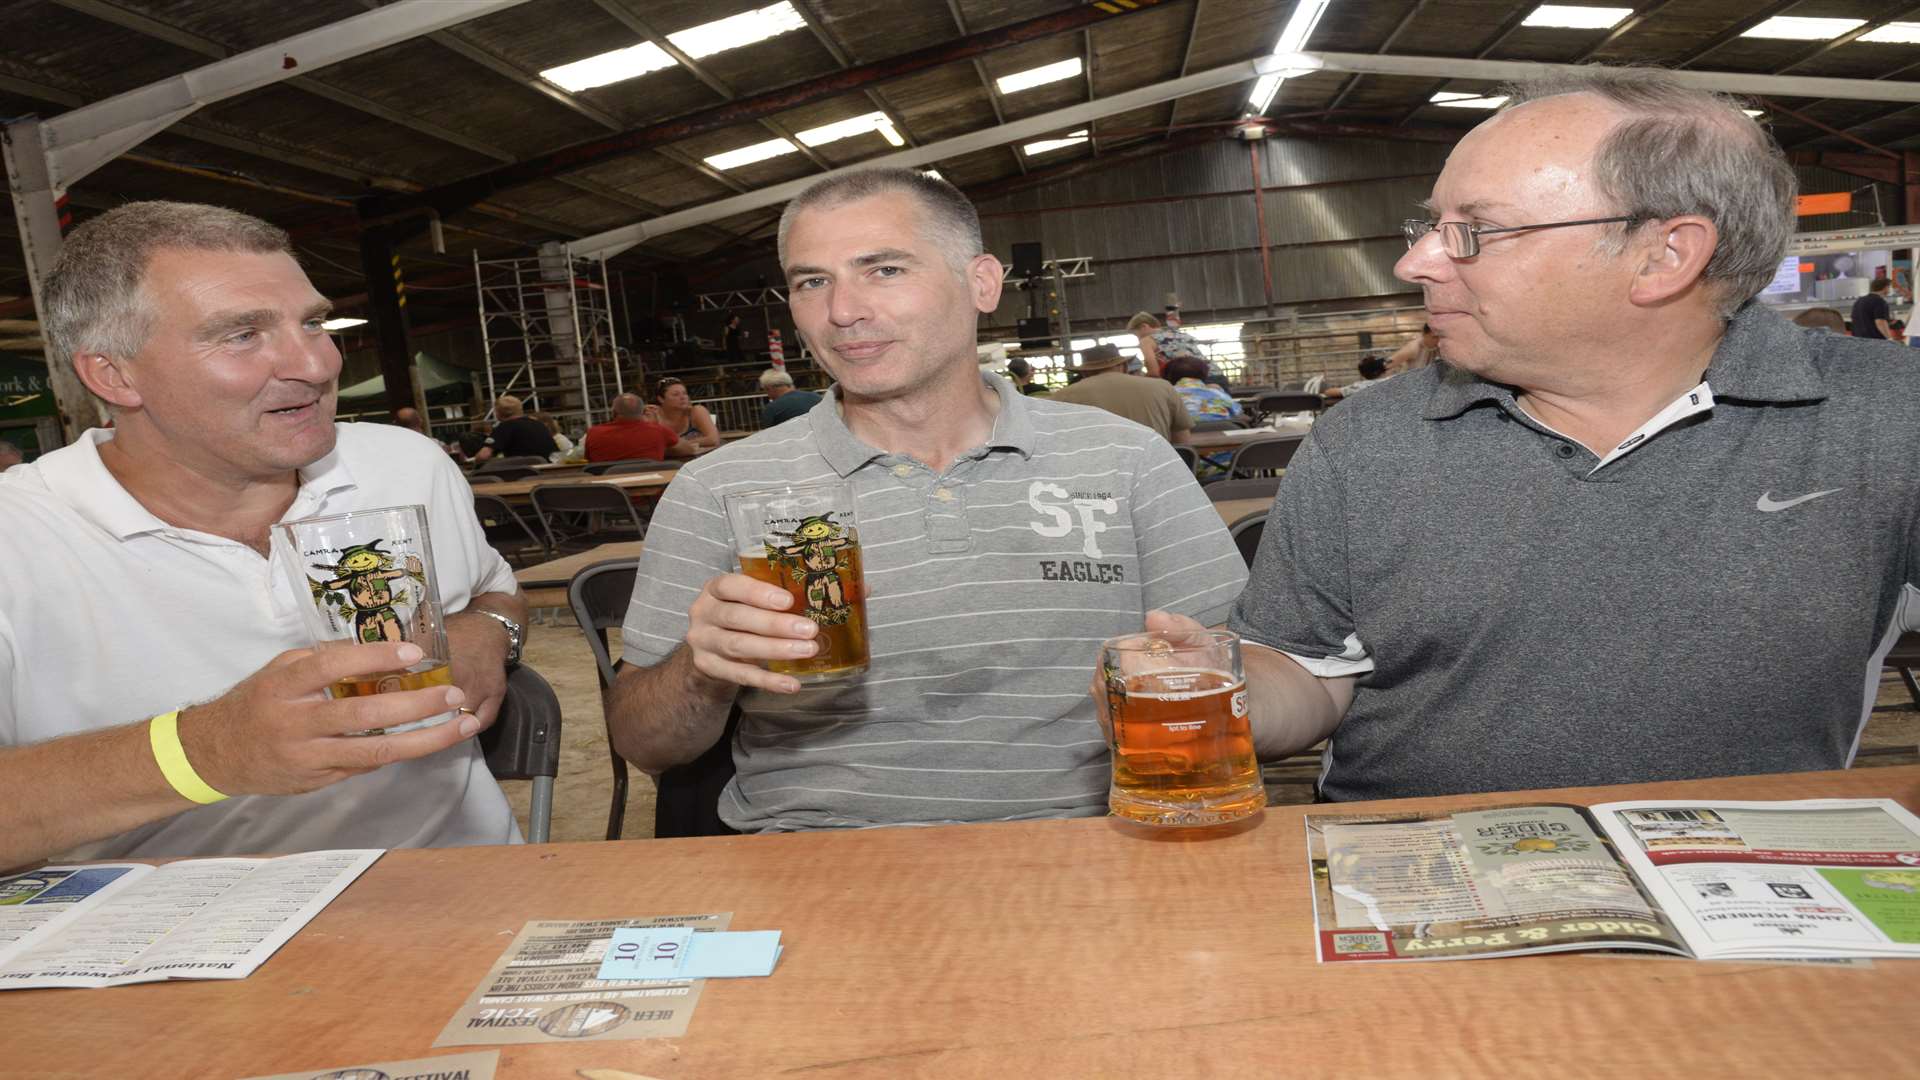 Friends chat over a beer at a previous Kent Beer Festival held at Merton Farm in Canterbury